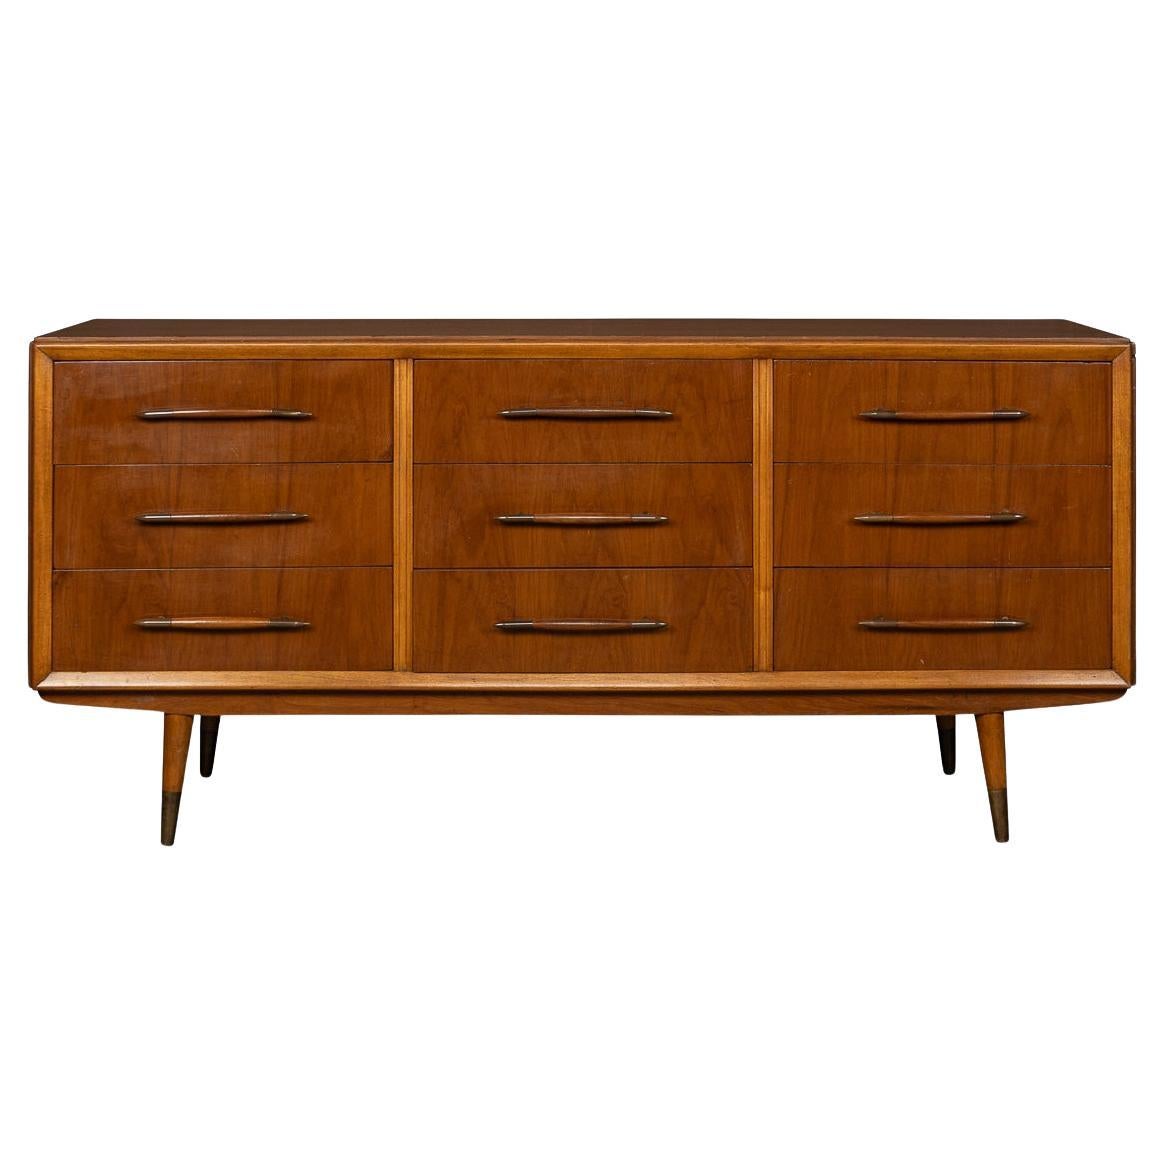 20th Century Italian Credenza With Brass Handles, c.1950 For Sale